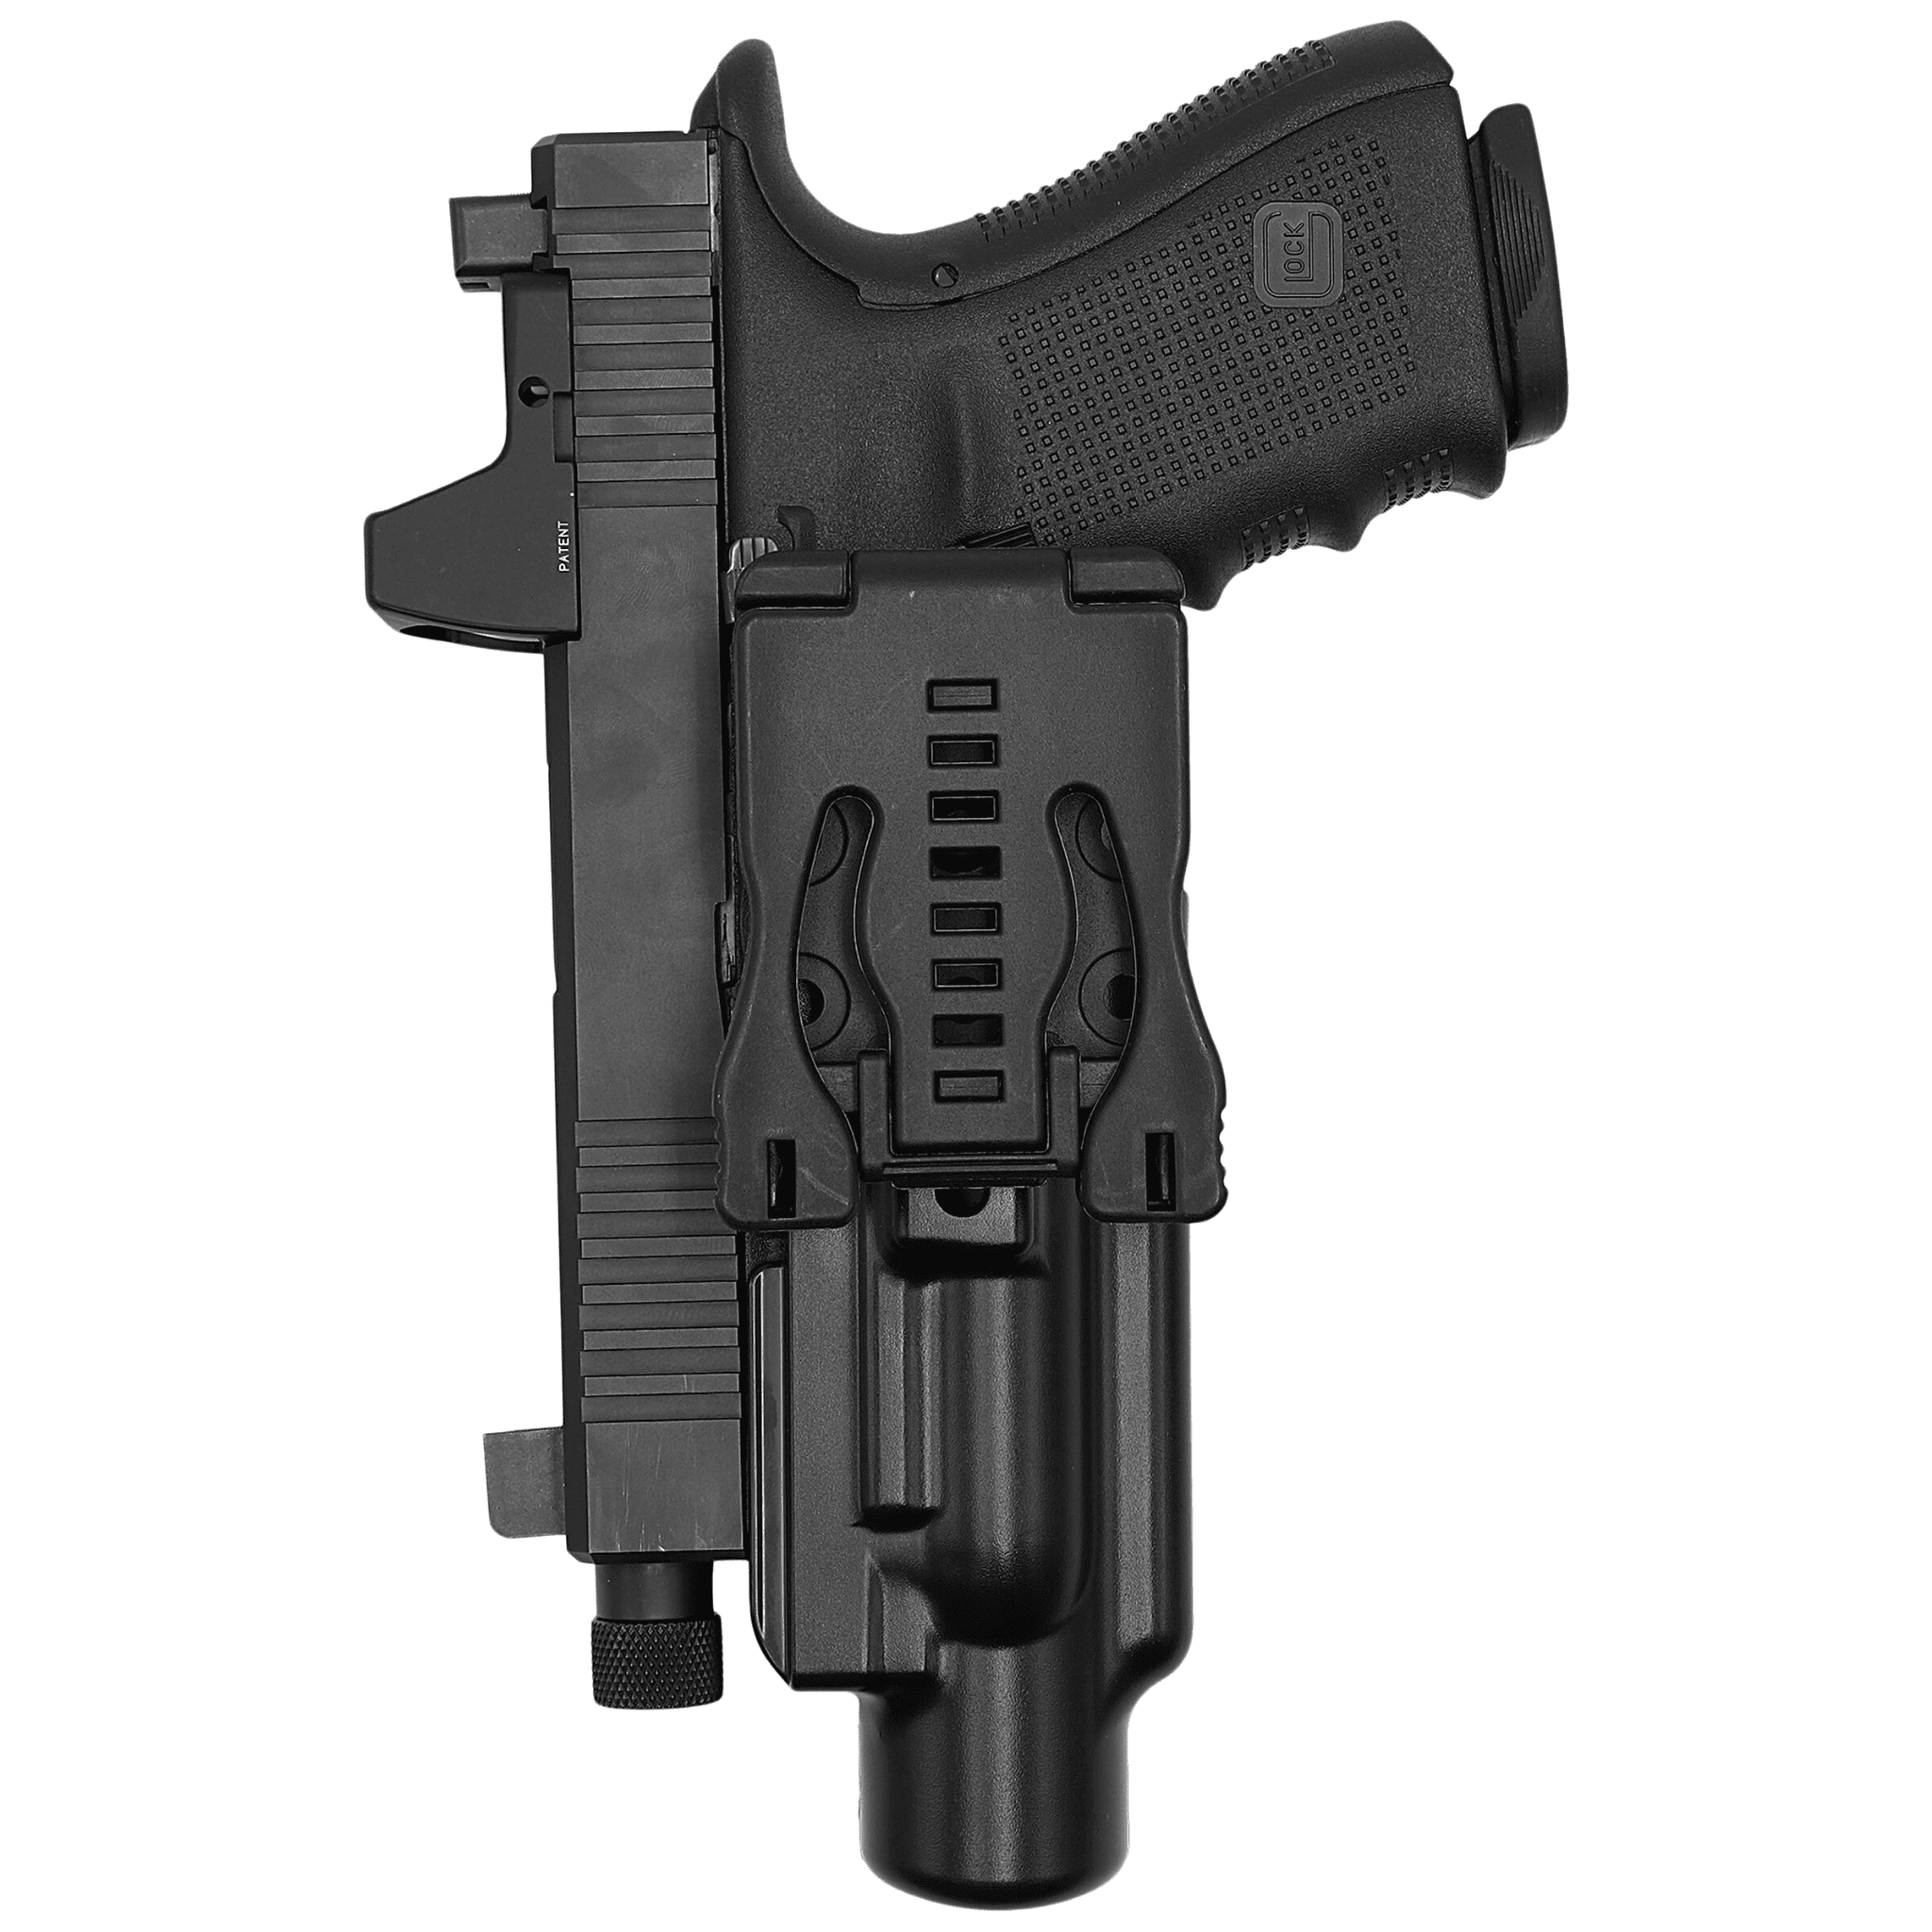 2. Understanding the Functionality of Holsters for Suppressed Firearms